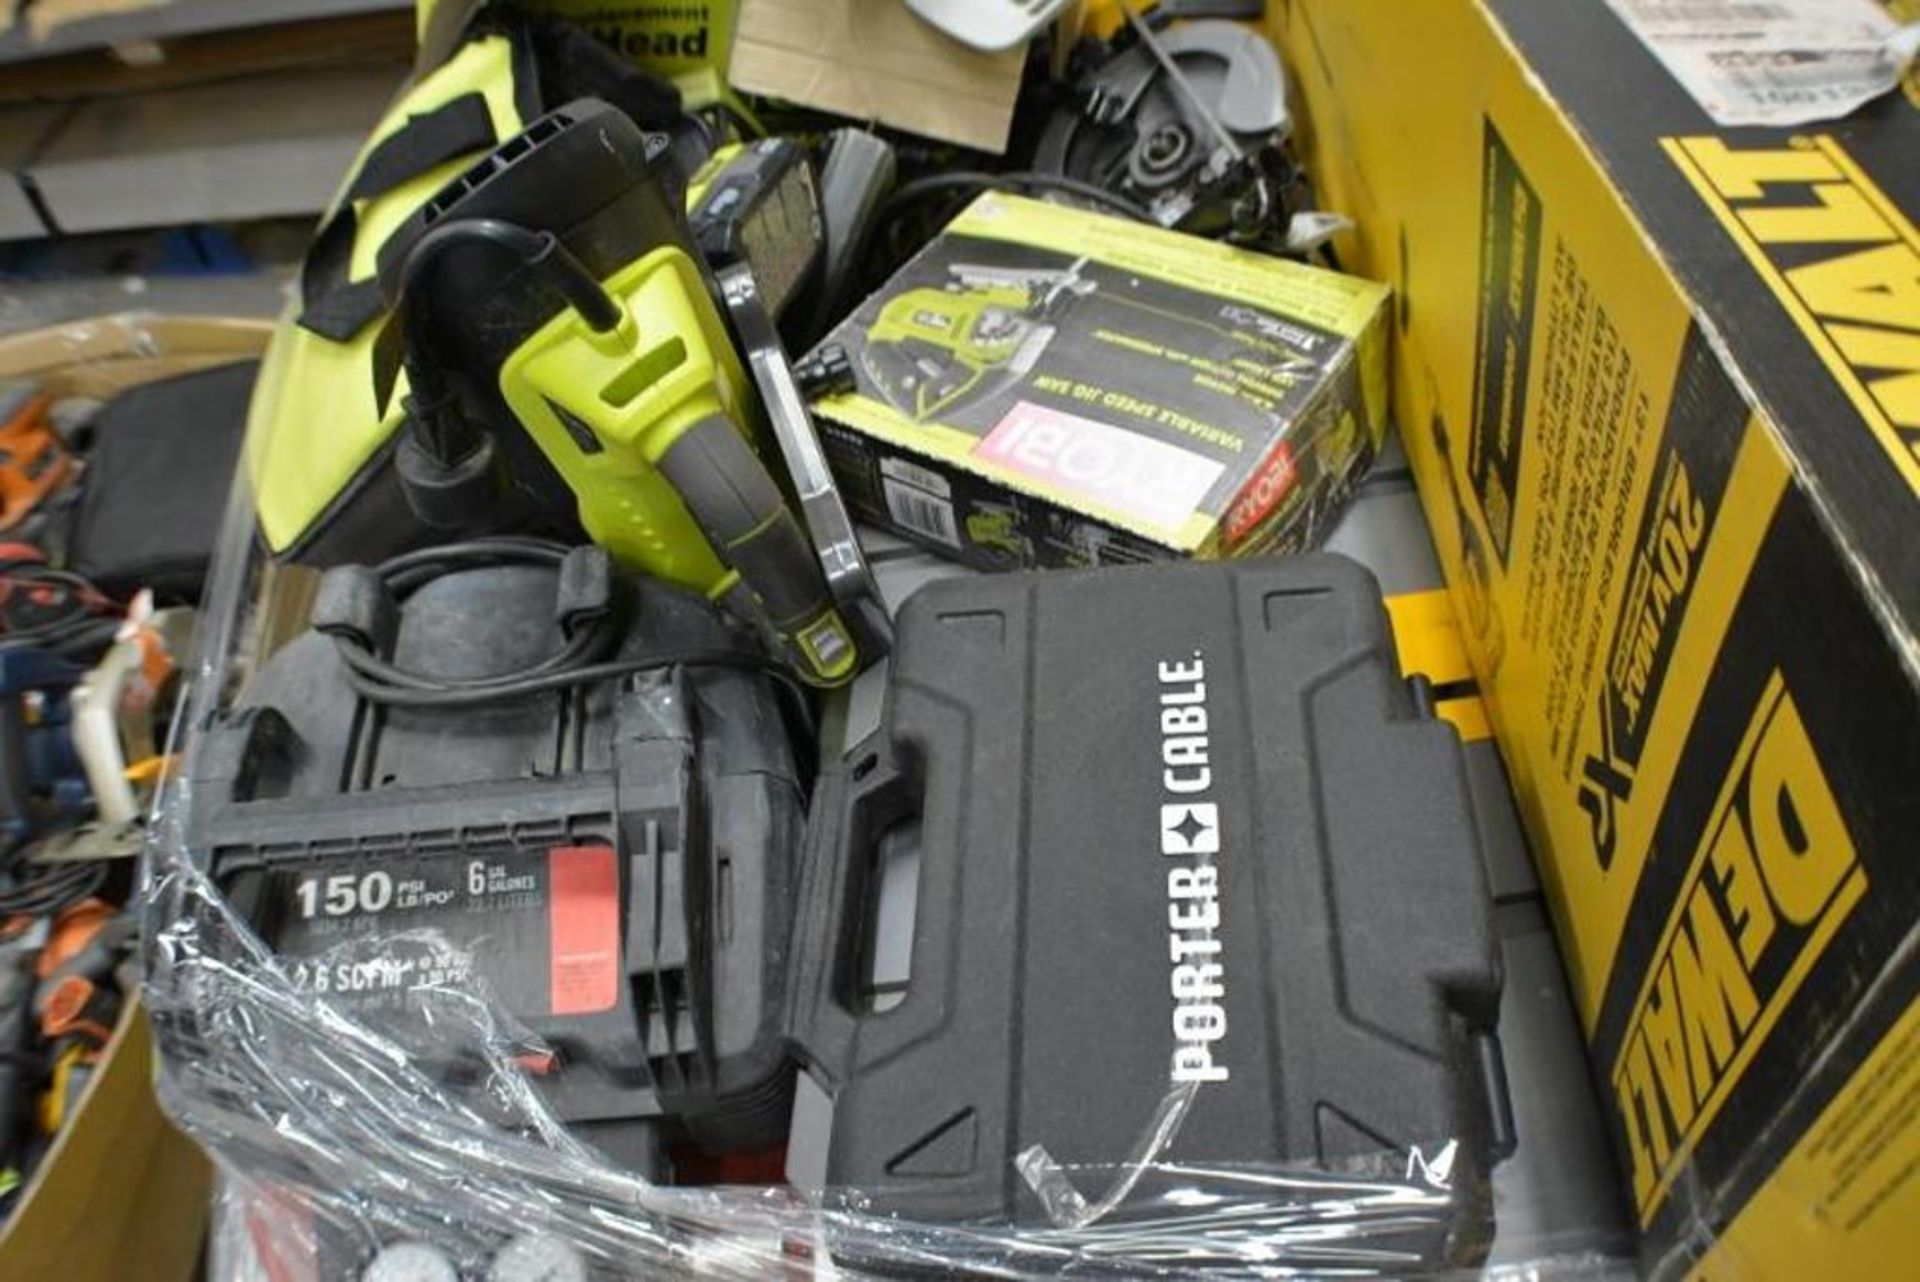 Tools by Assorted Brands. Dewalt + Porter Cable + Ridgid + Ryobi. Assorted Tools. Contents of Pallet - Image 8 of 8